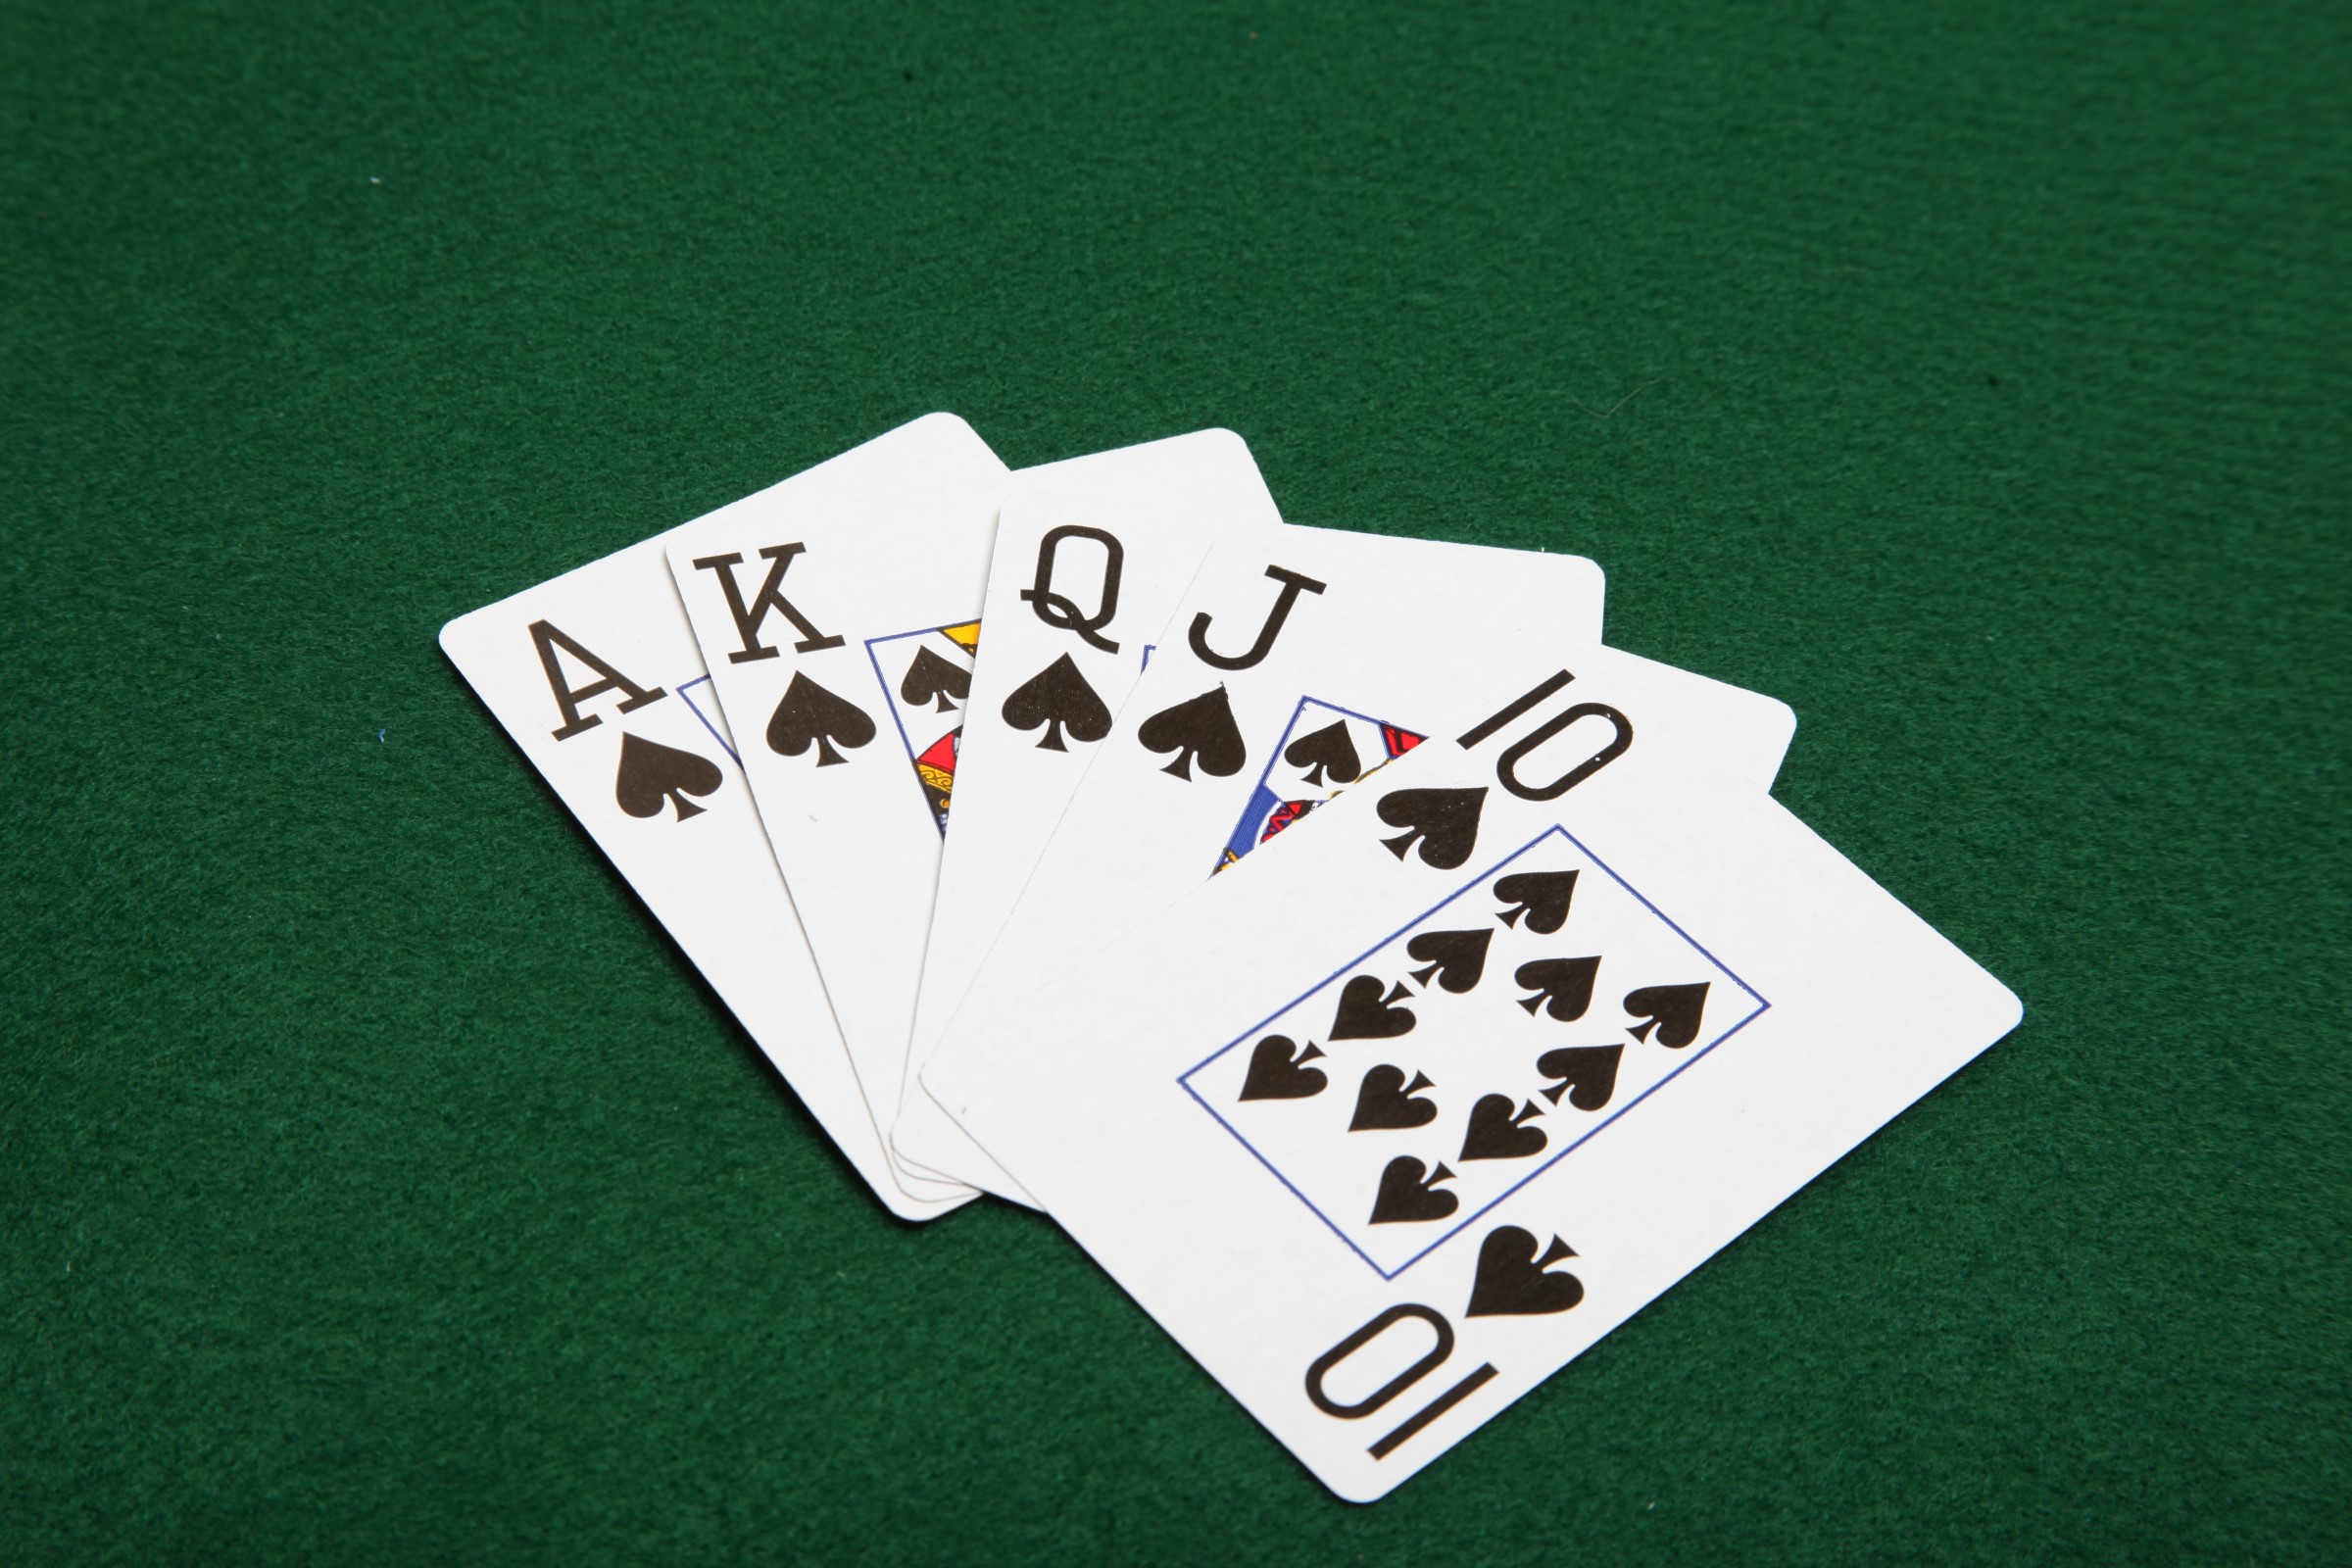 Poker hand -Straight, 5, Bet, Cards, Draw, HQ Photo